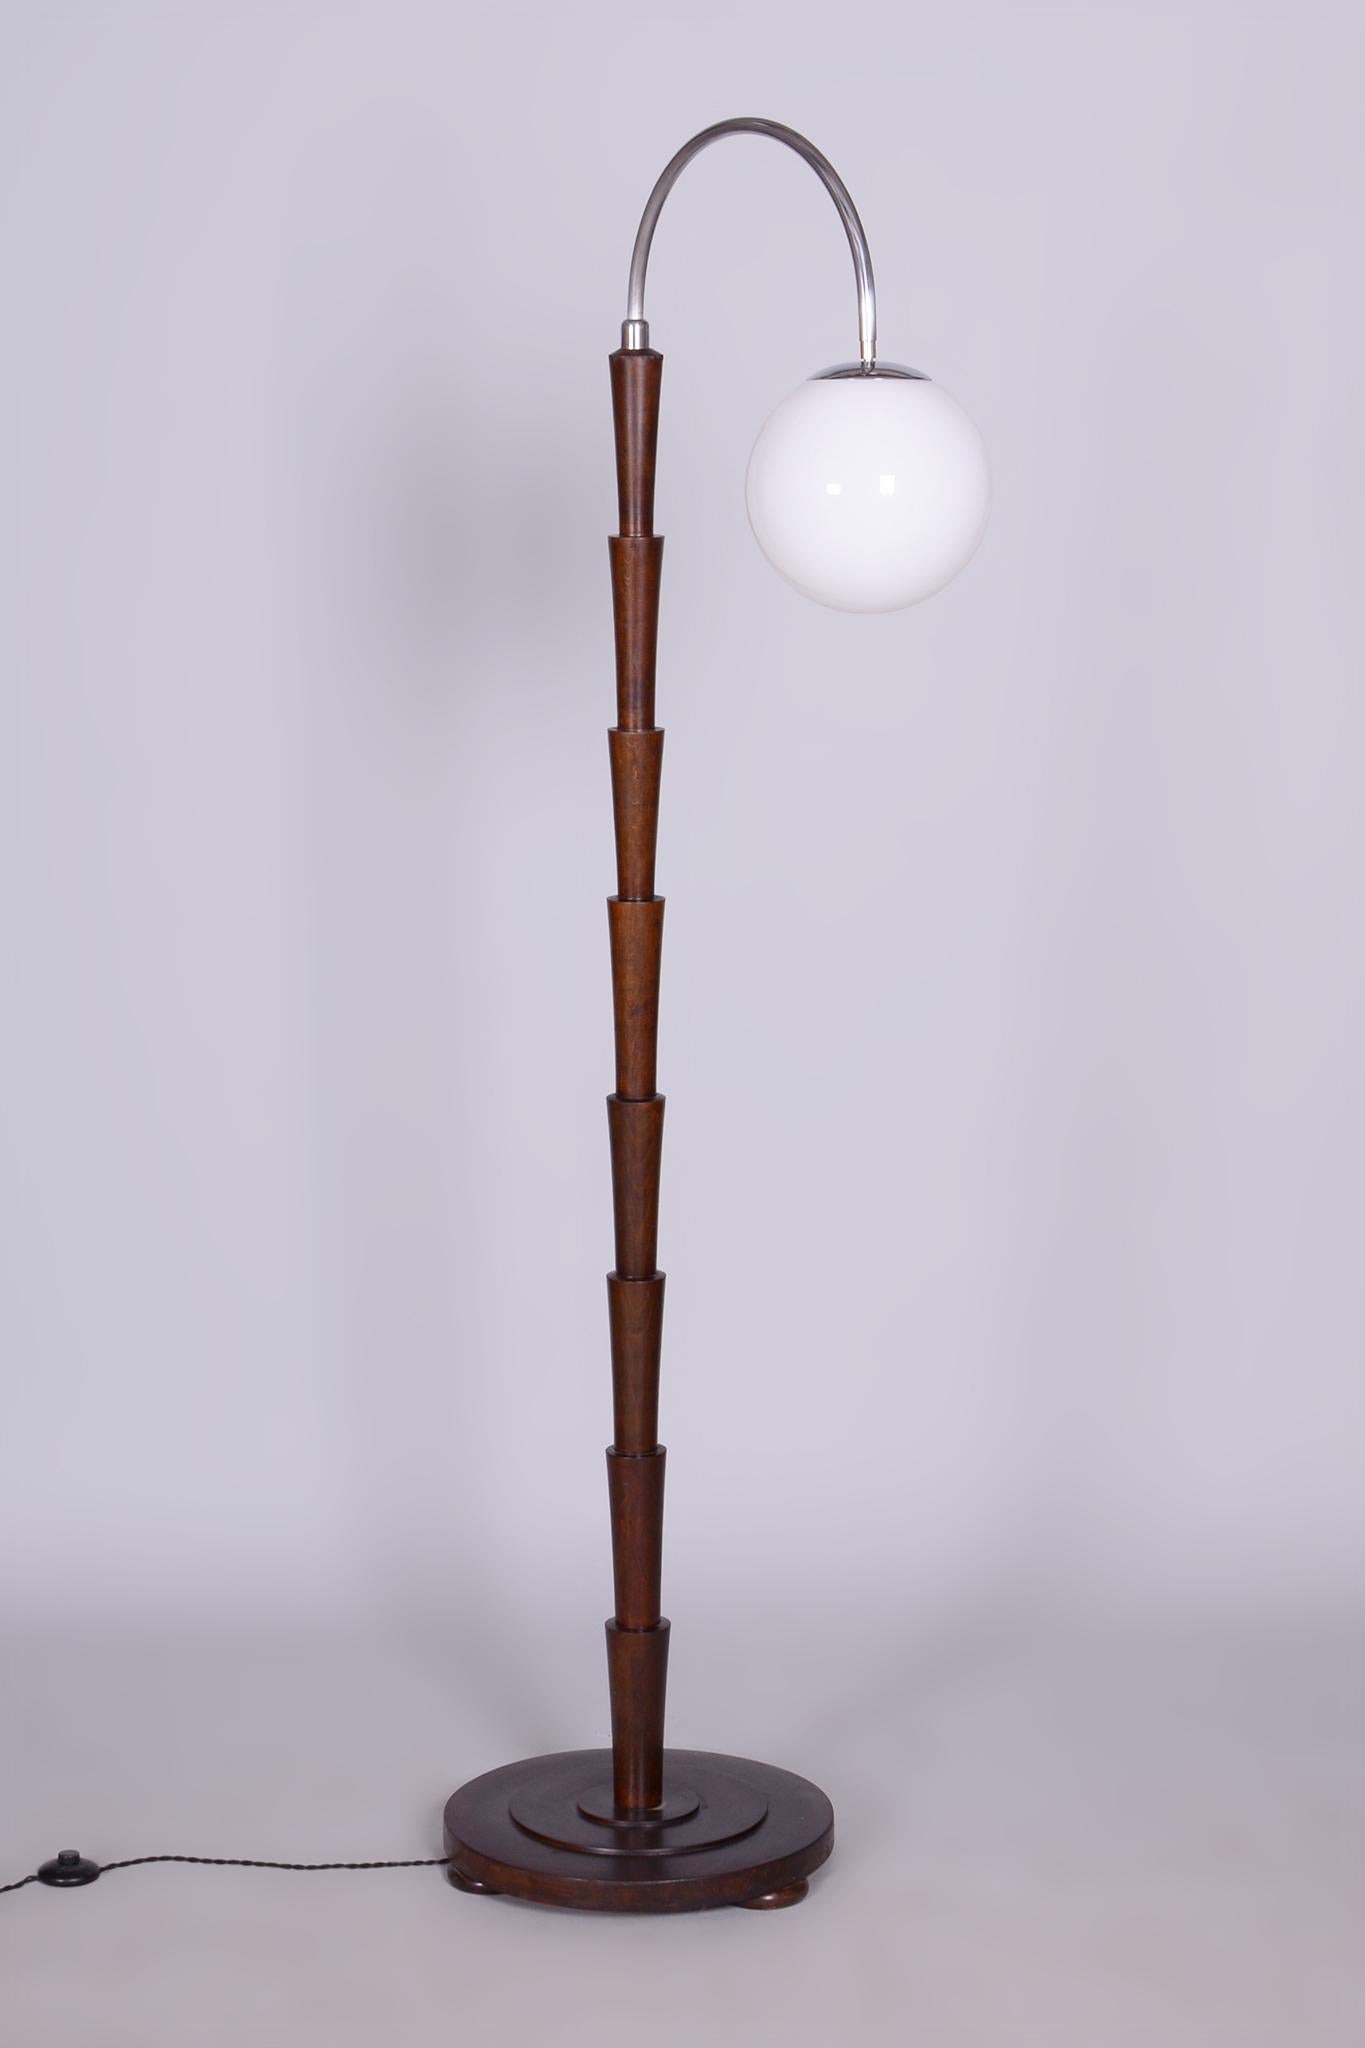 Restored Czech Cubism Floor Lamp.

Source: Czechia (Czechoslovakia)
Style: Cubism
Period: 1920-1929.
Material: Beech, chrome-plated steel.

The chrome parts have been cleaned and professionally restored. 

Our professional refurbishing team in